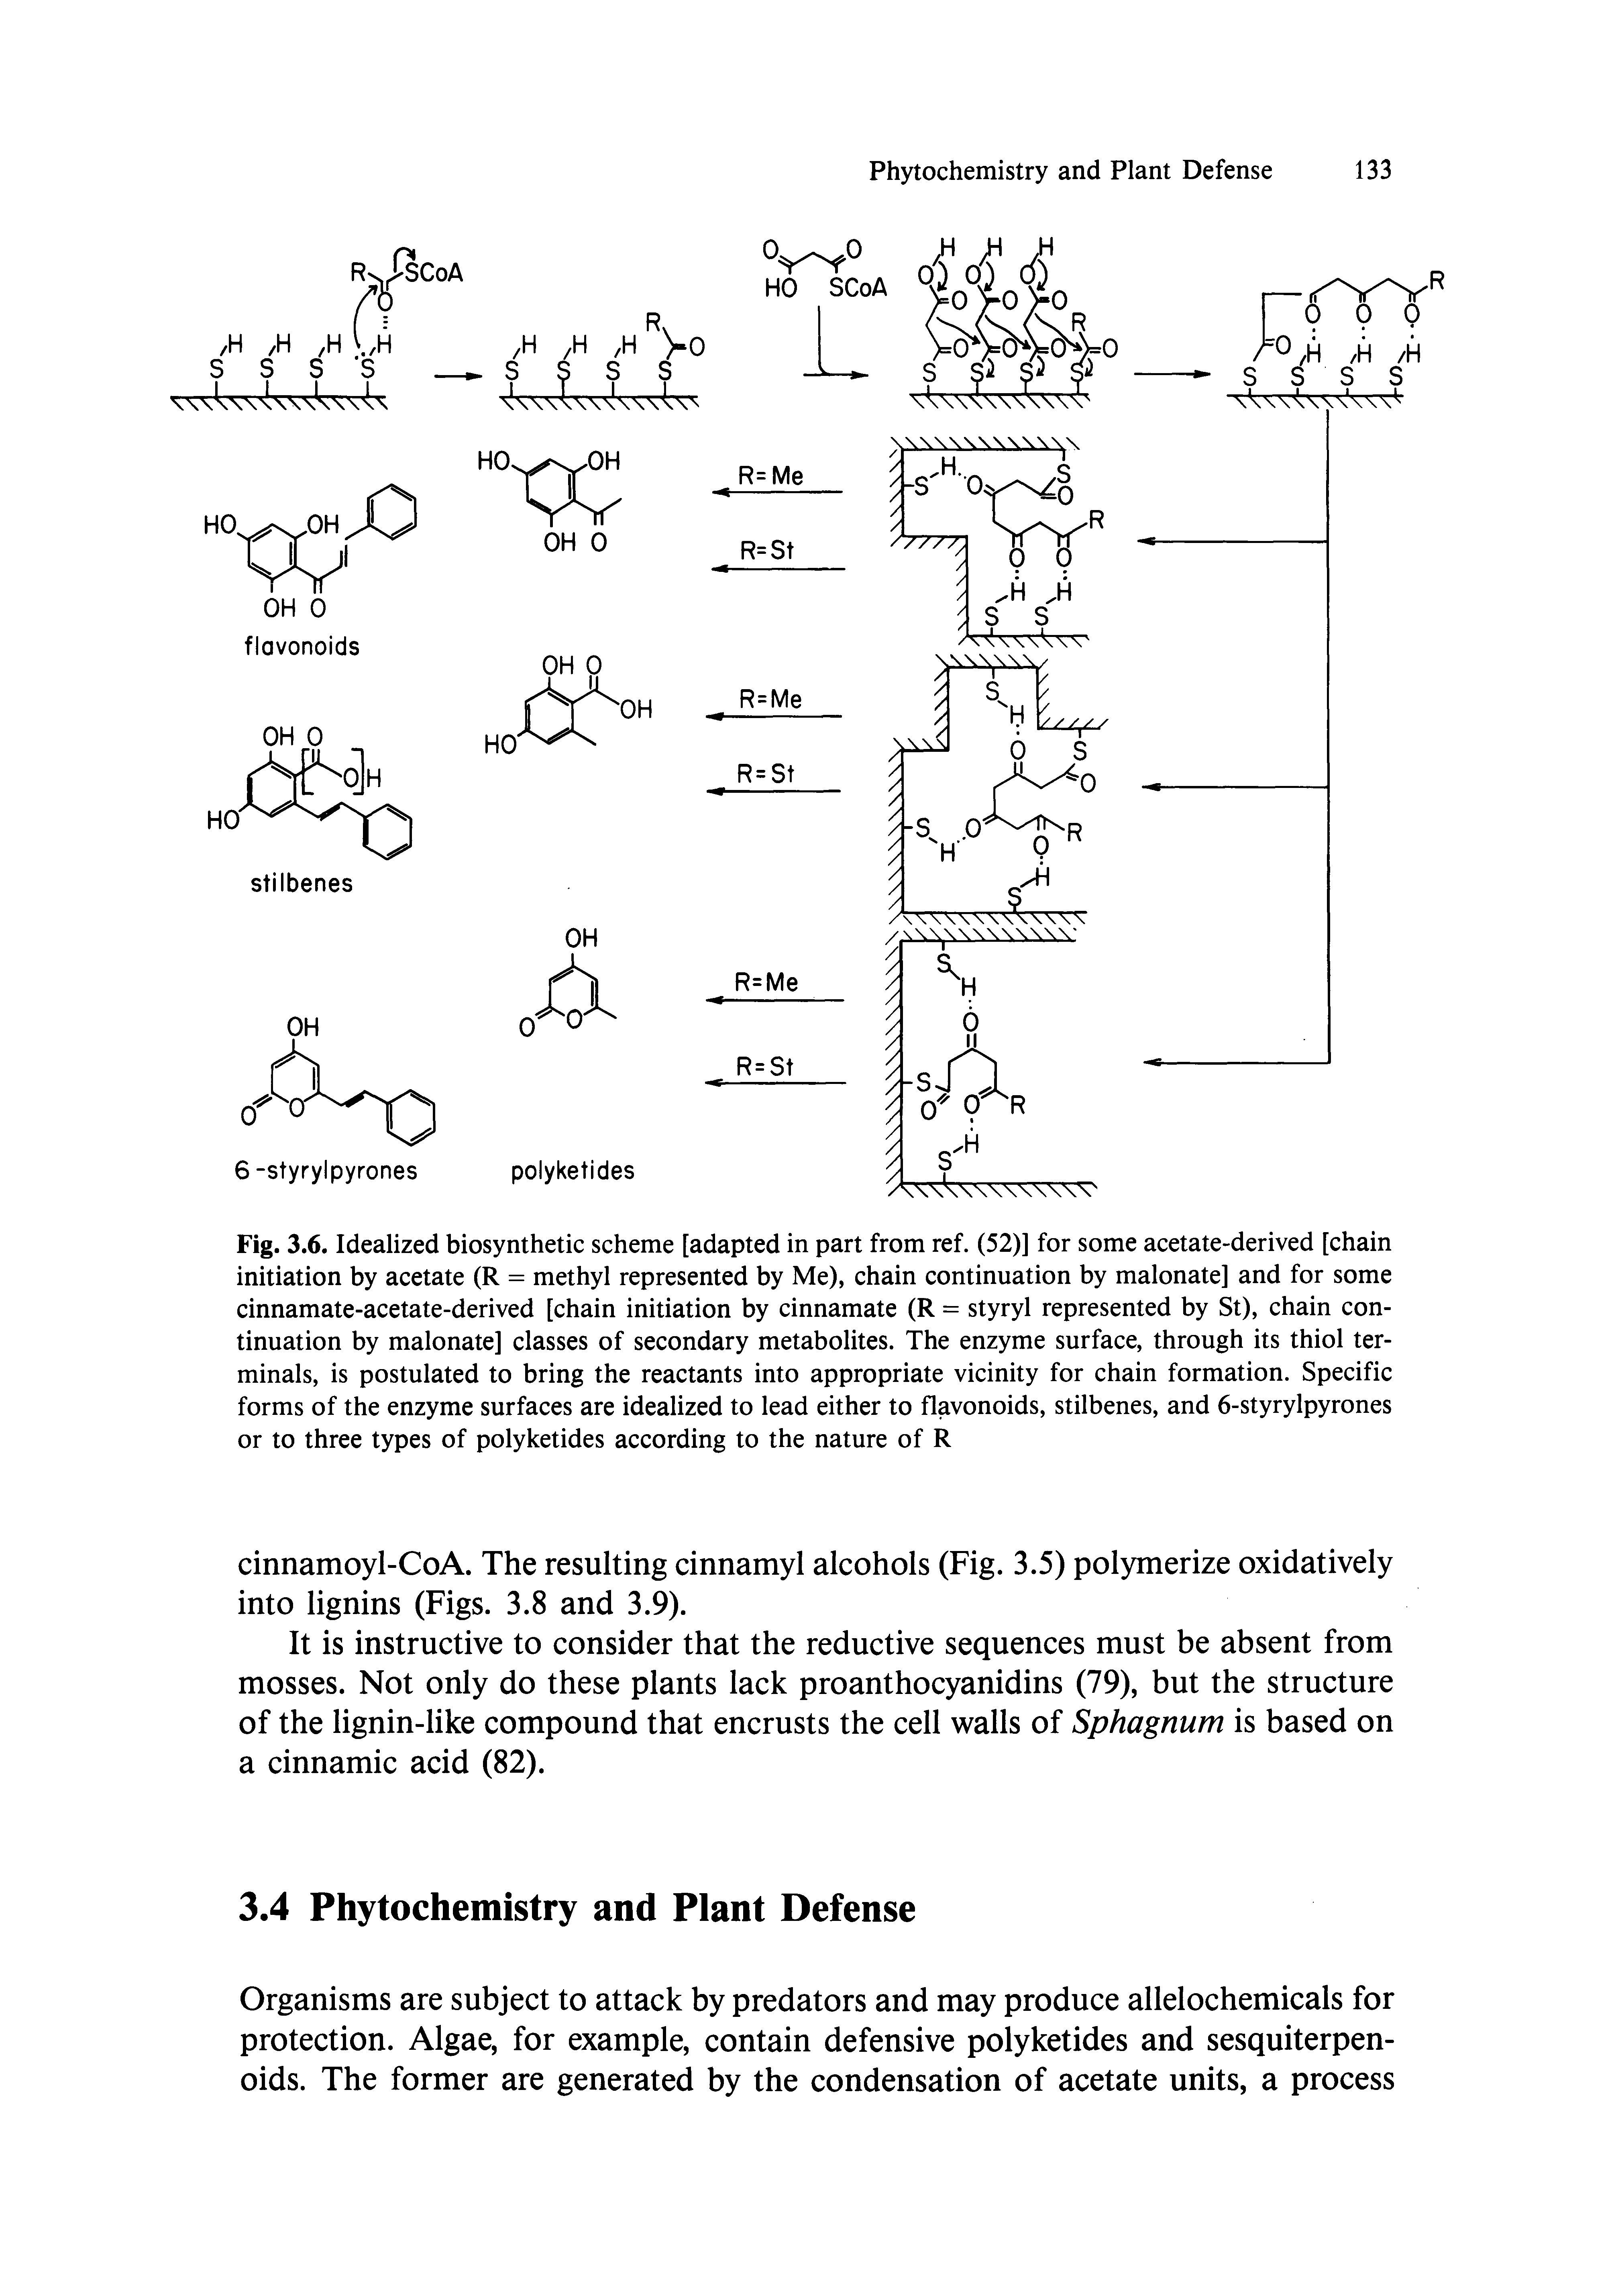 Fig. 3.6. Idealized biosynthetic scheme [adapted in part from ref. (52)] for some acetate-derived [chain initiation by acetate (R = methyl represented by Me), chain continuation by malonate] and for some cinnamate-acetate-derived [chain initiation by cinnamate (R = styryl represented by St), chain continuation by malonate] classes of secondary metabolites. The enzyme surface, through its thiol terminals, is postulated to bring the reactants into appropriate vicinity for chain formation. Specific forms of the enzyme surfaces are idealized to lead either to flavonoids, stilbenes, and 6-styrylpyrones or to three types of polyketides according to the nature of R...